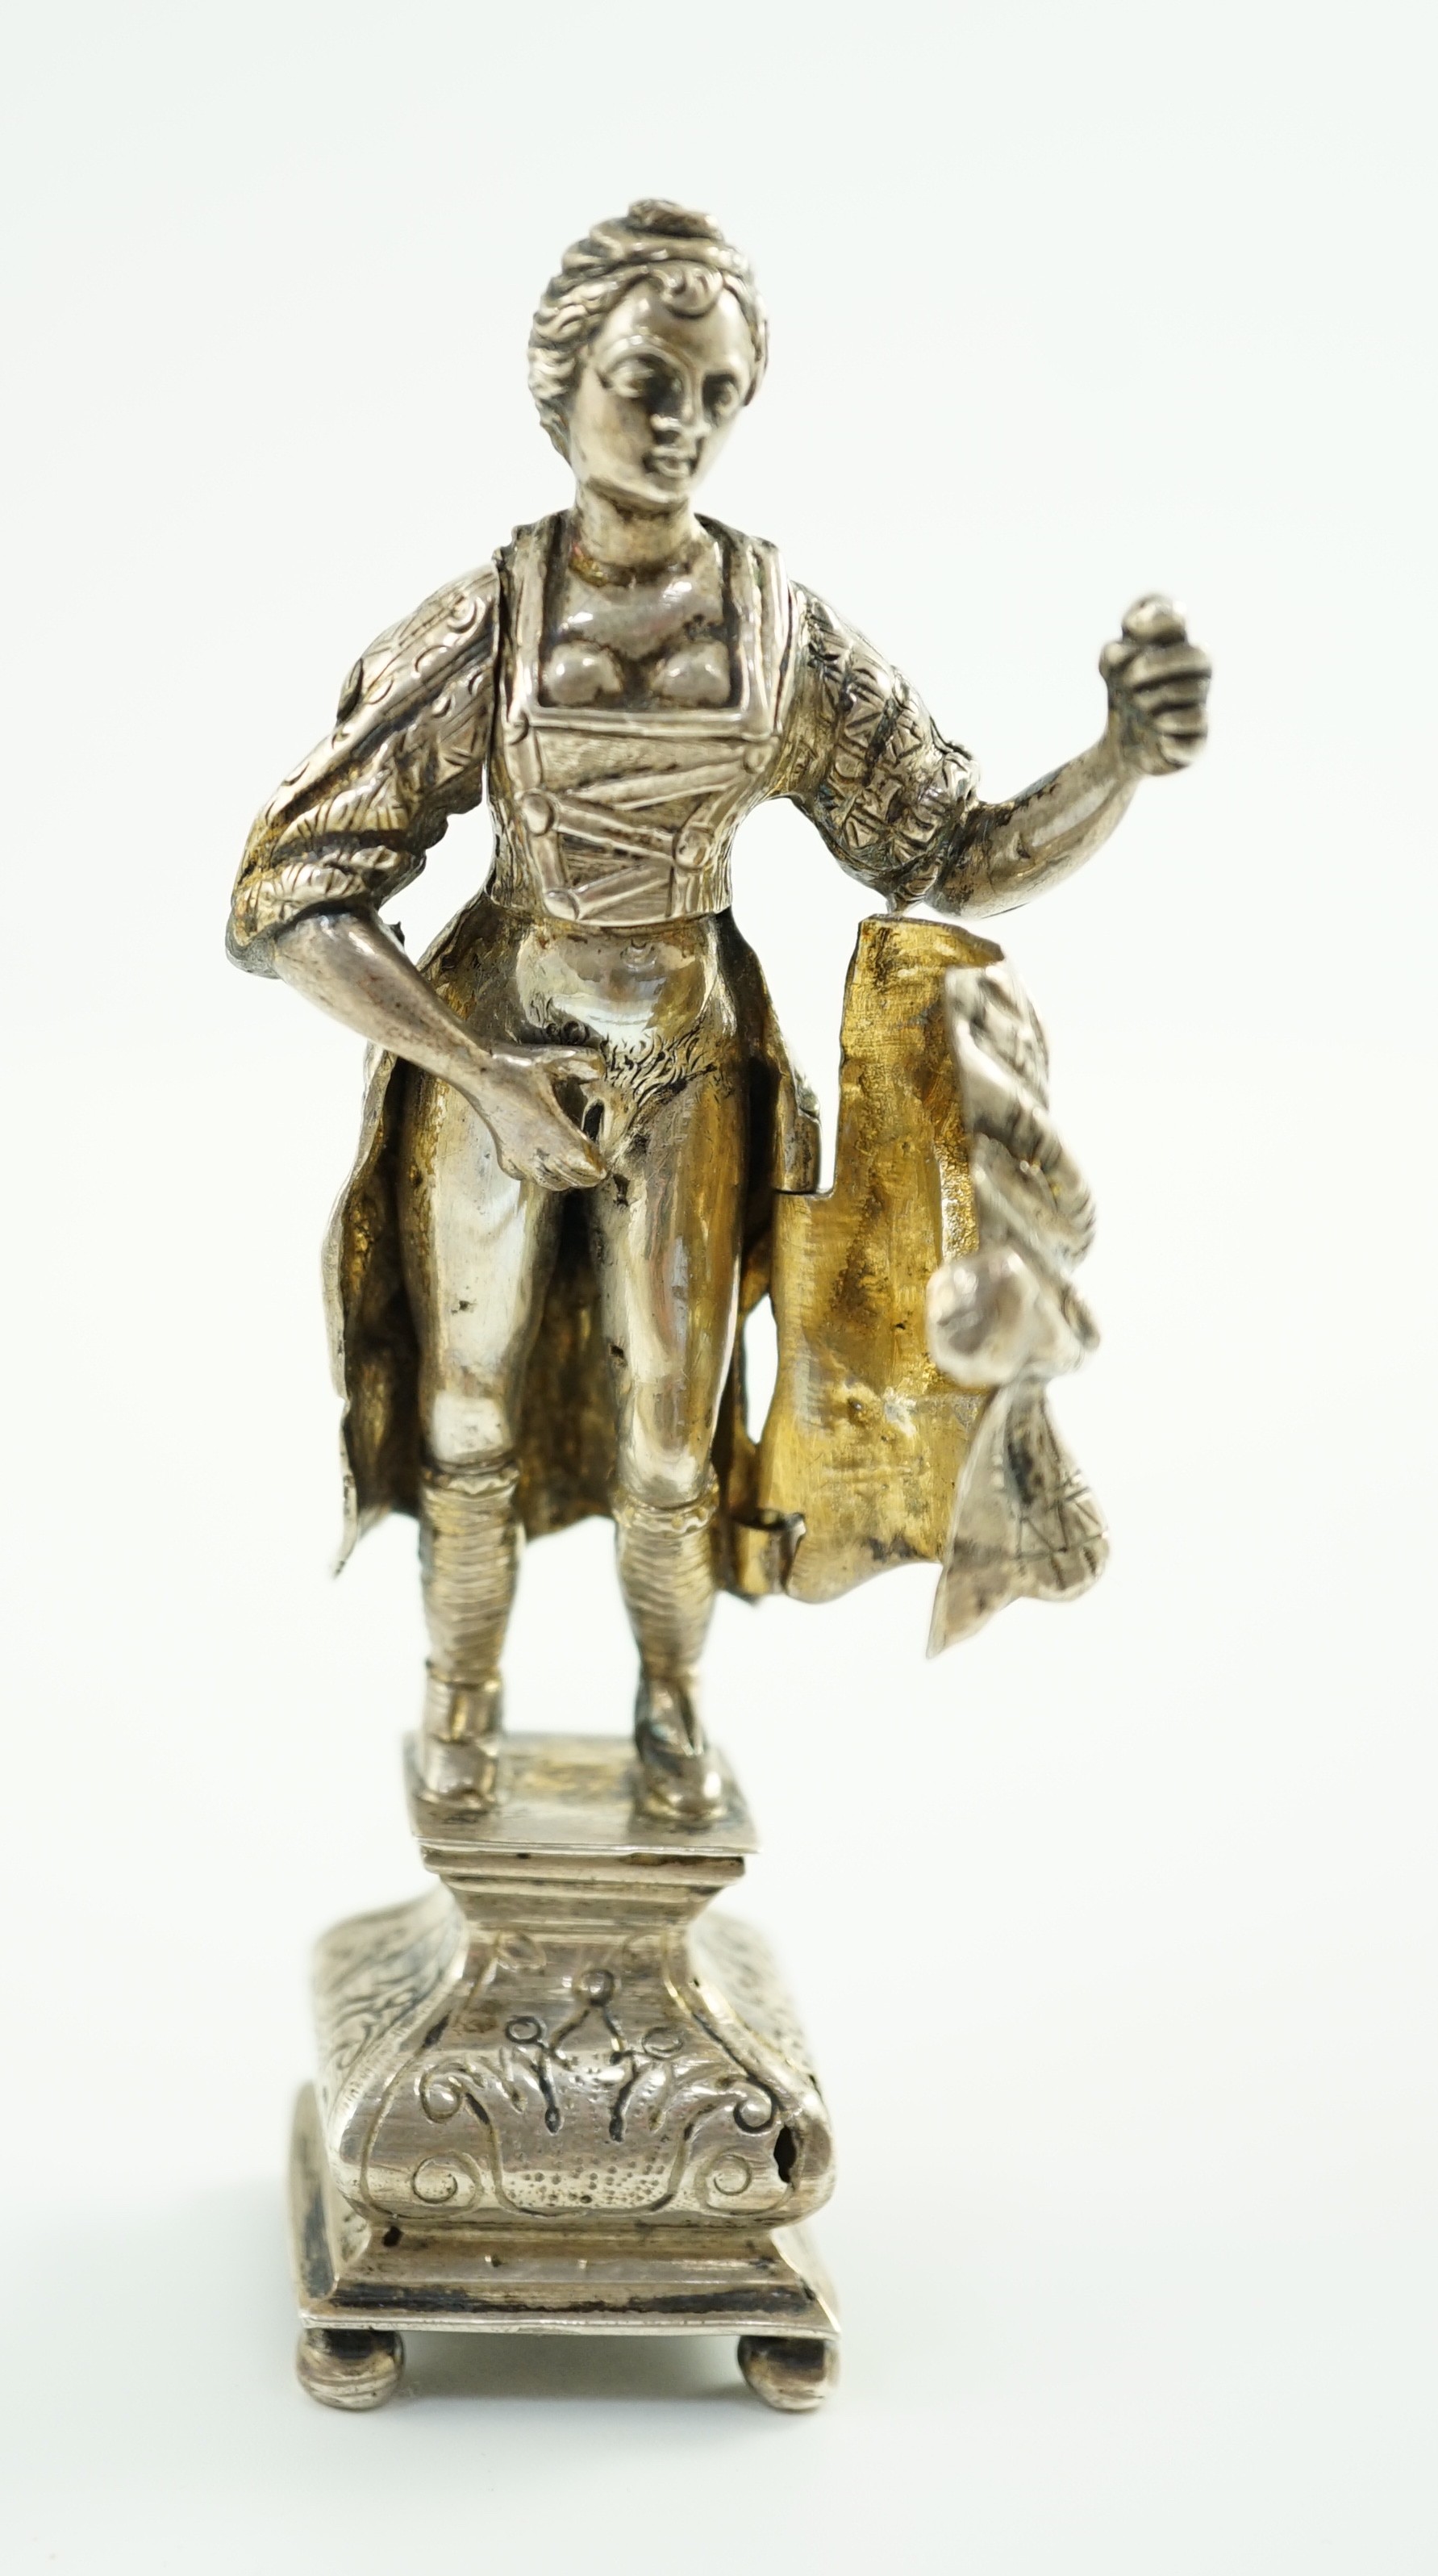 A late 19th century Dutch silver erotic miniature figure of a lady, on a square base with ball feet